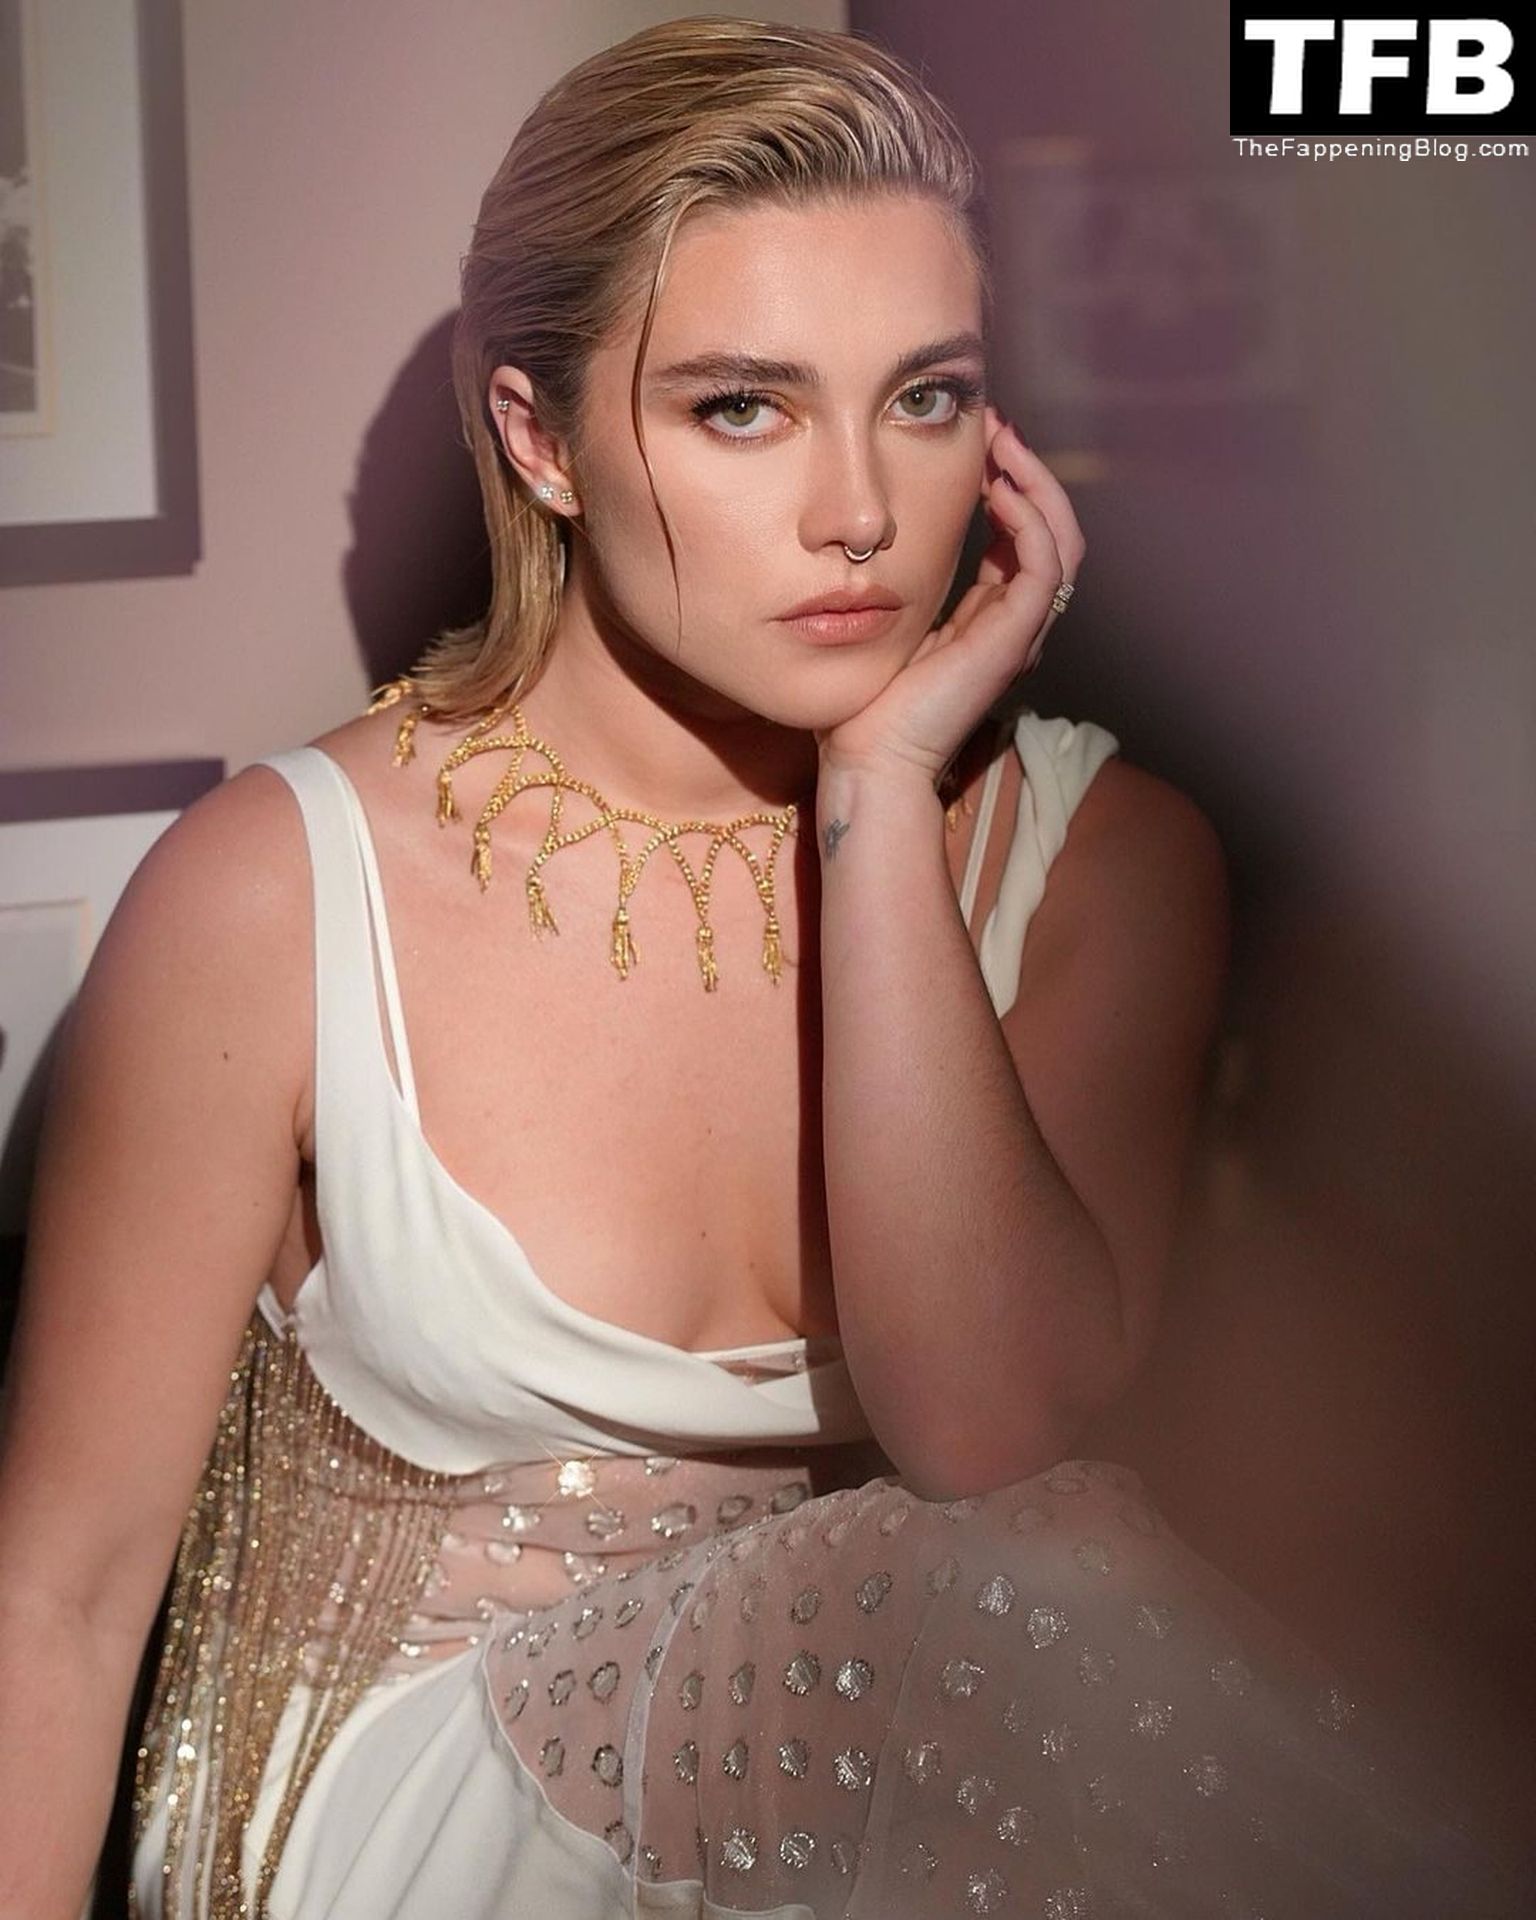 Florence-Pugh-Sexy-The-Fappening-Blog-21-1.jpg